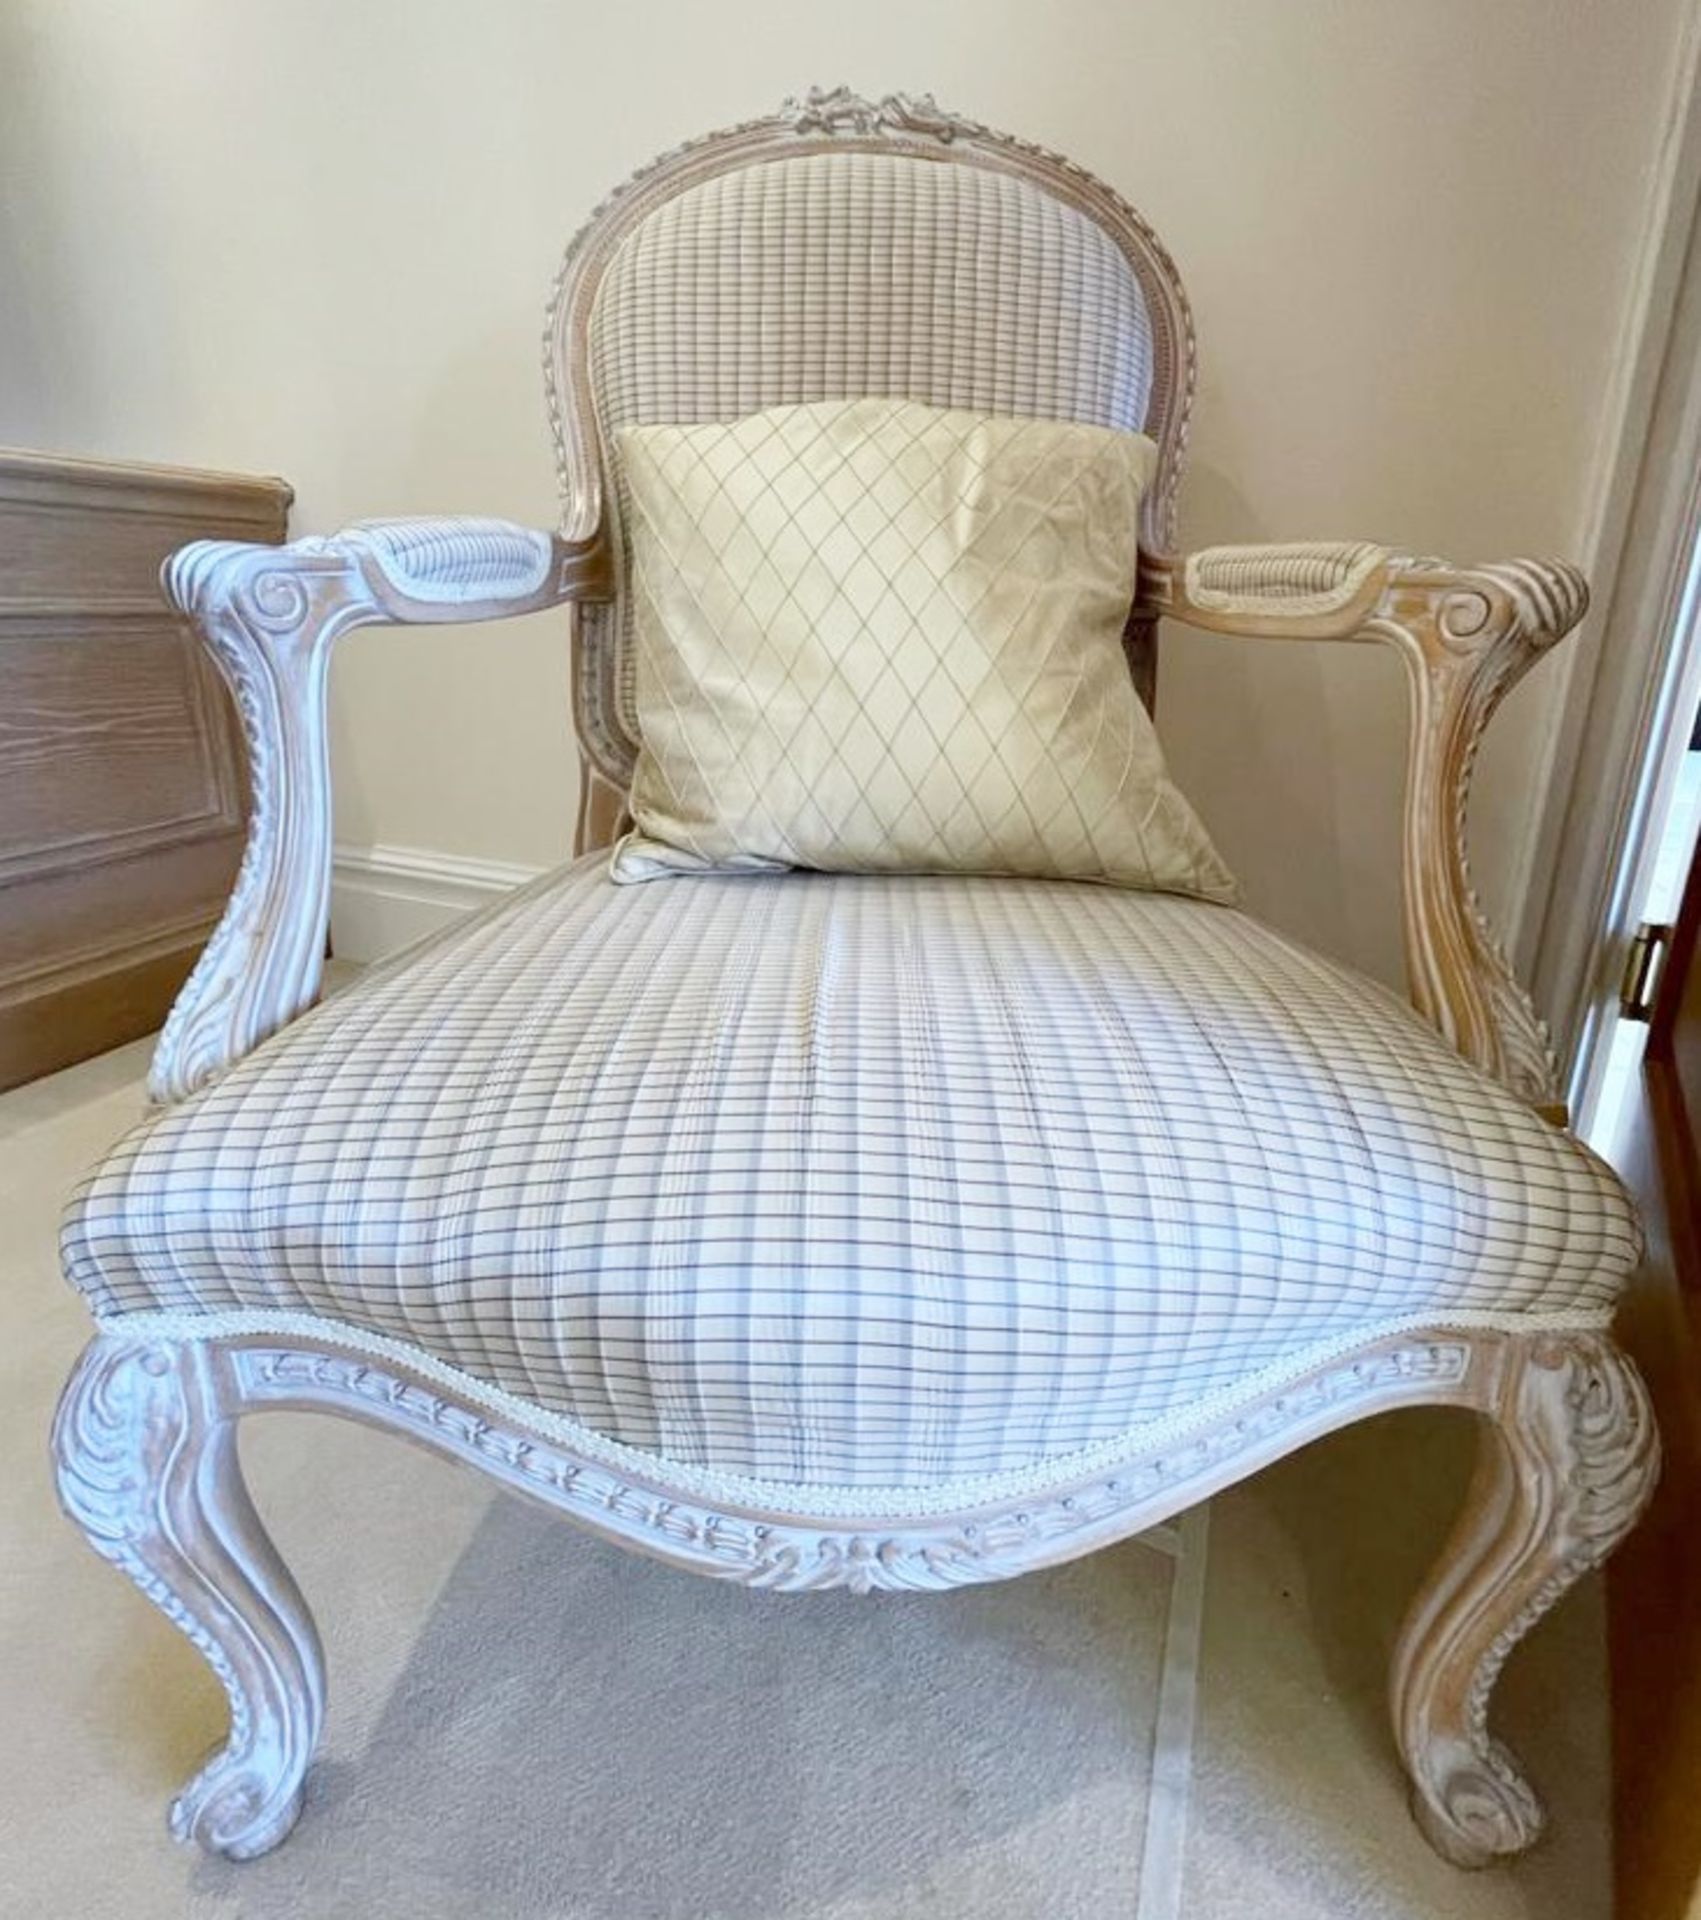 Pair of French Shabby Chic Bedroom Chairs - Stunning Carved Wood Chair Upholstered With Striped - Image 15 of 16